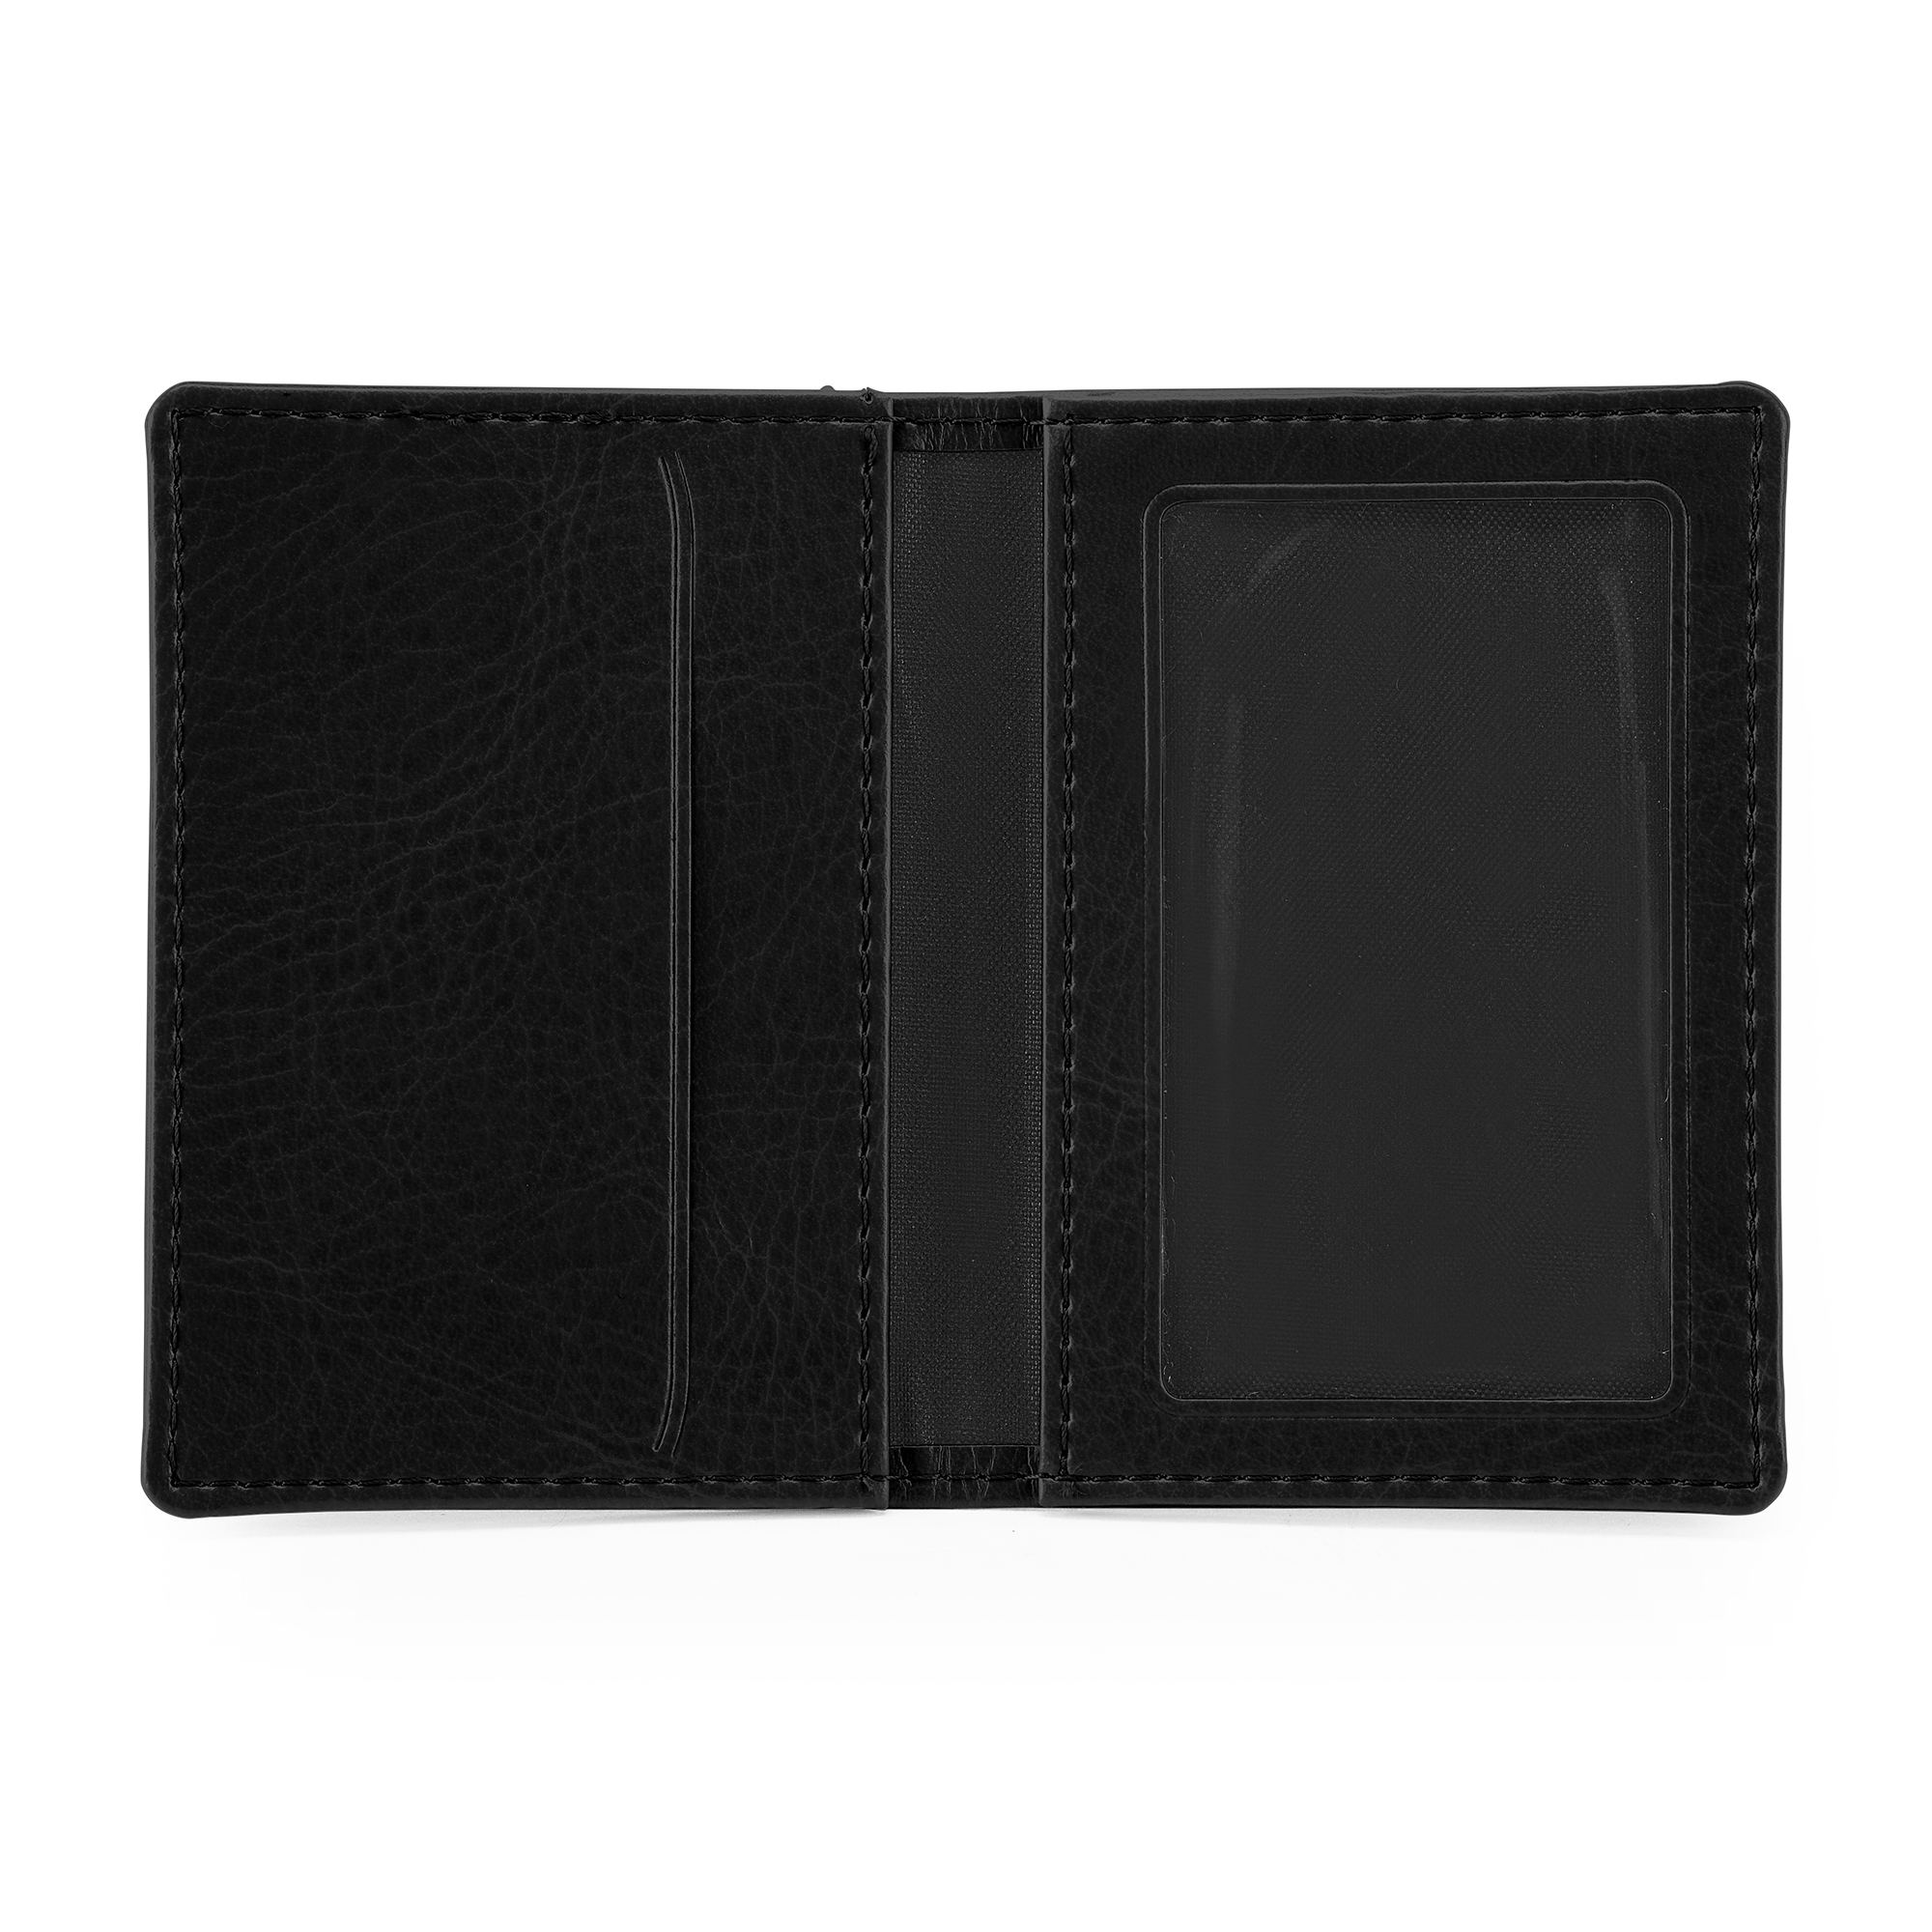 Promotional Oyster Travel Card Case